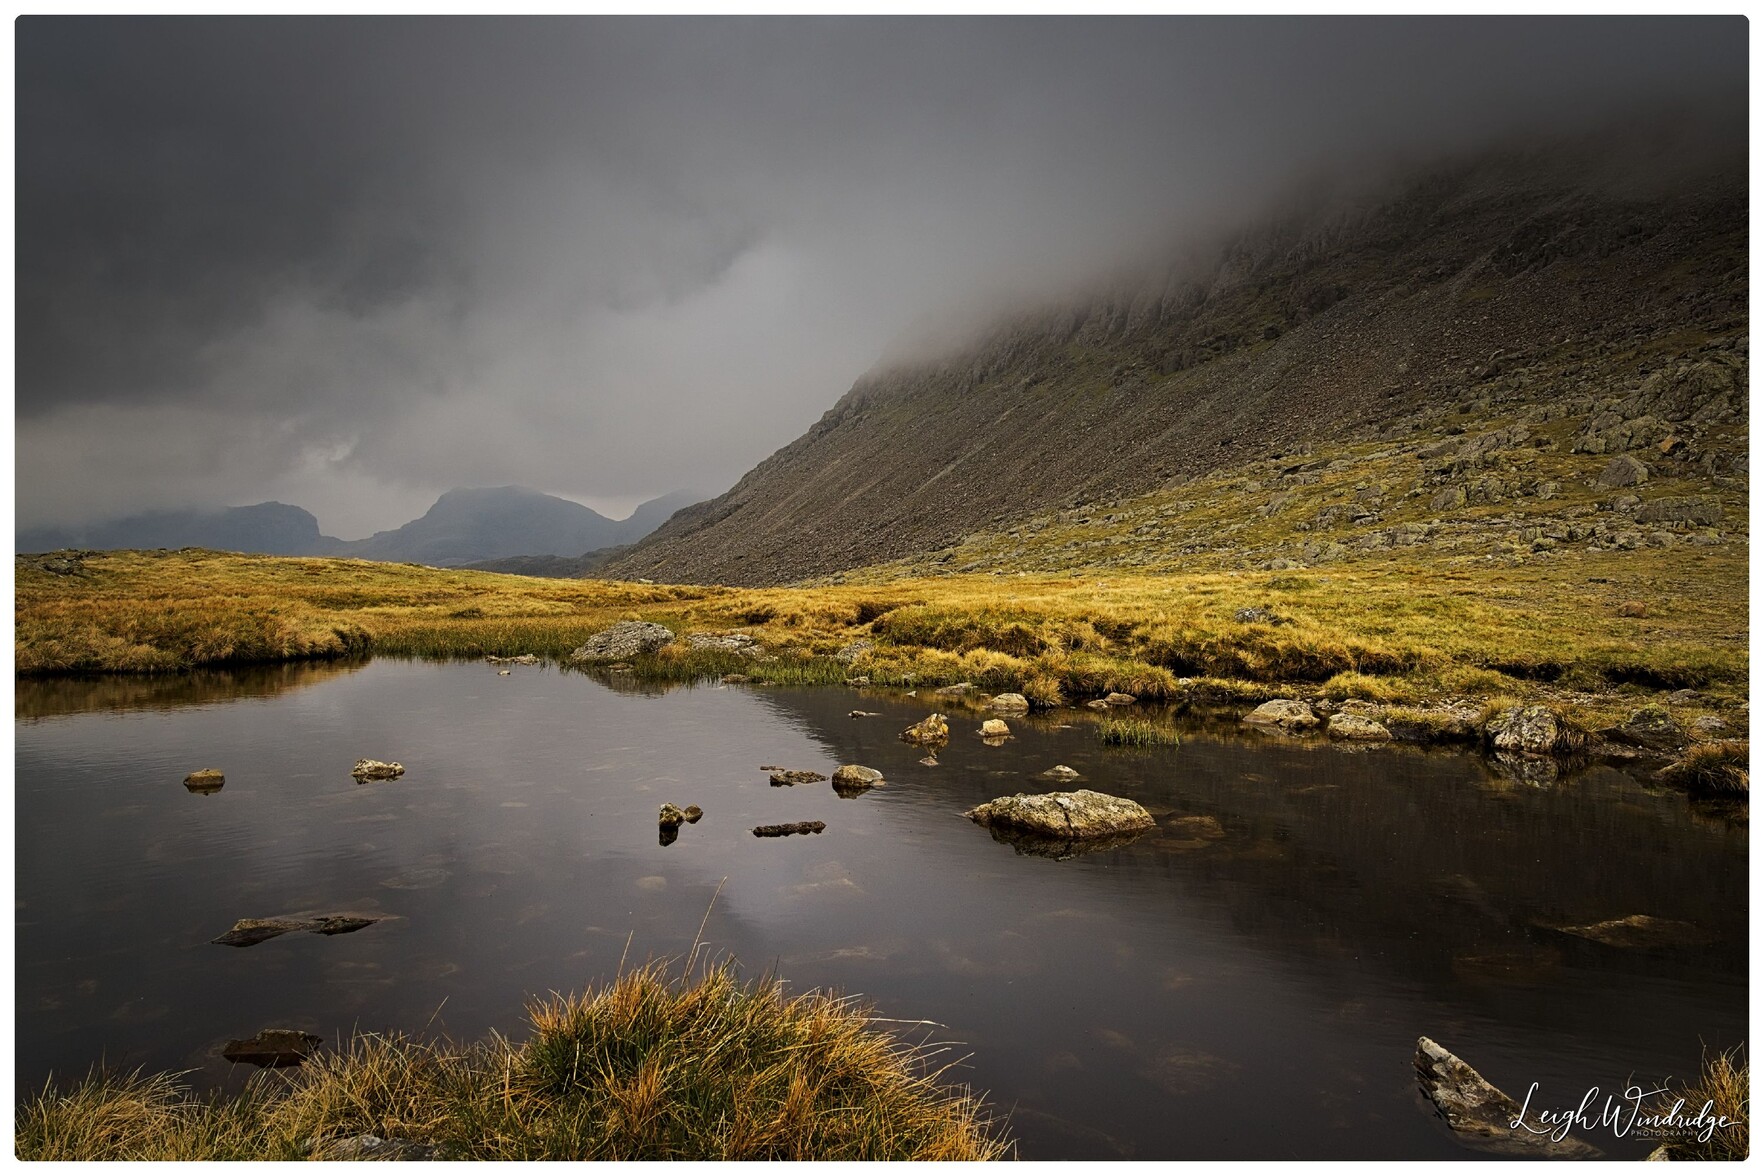 A view towards cloud strewn mountains with the cloud edging down to a large tarn of water in the foreground.